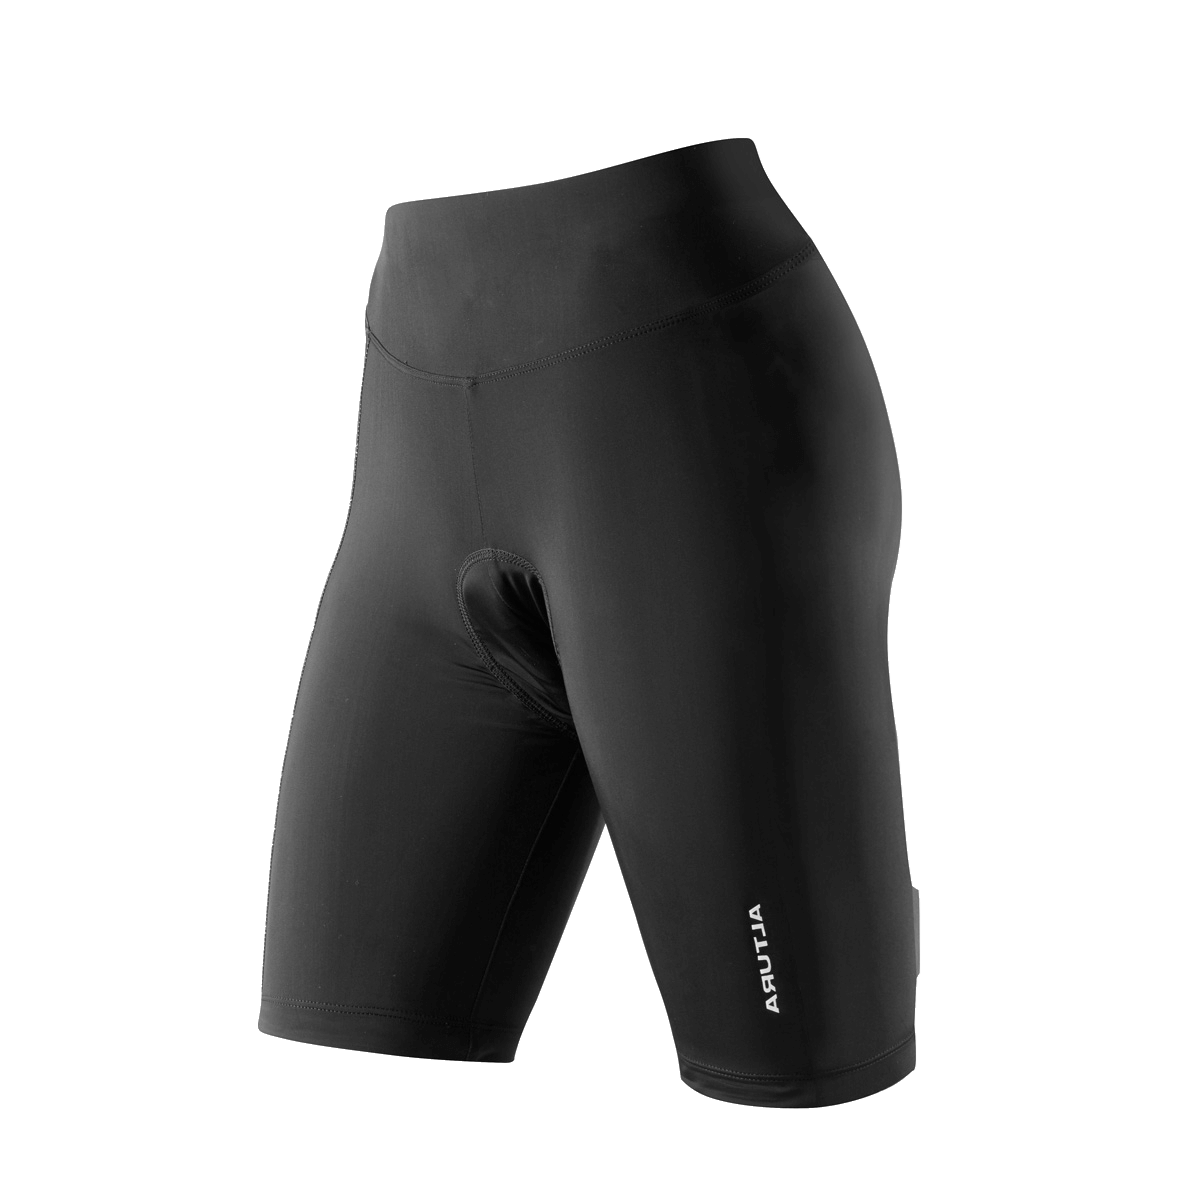 Cycle Tribe Product Sizes Black / Size 12 Altura Womens Airstream Waist Shorts